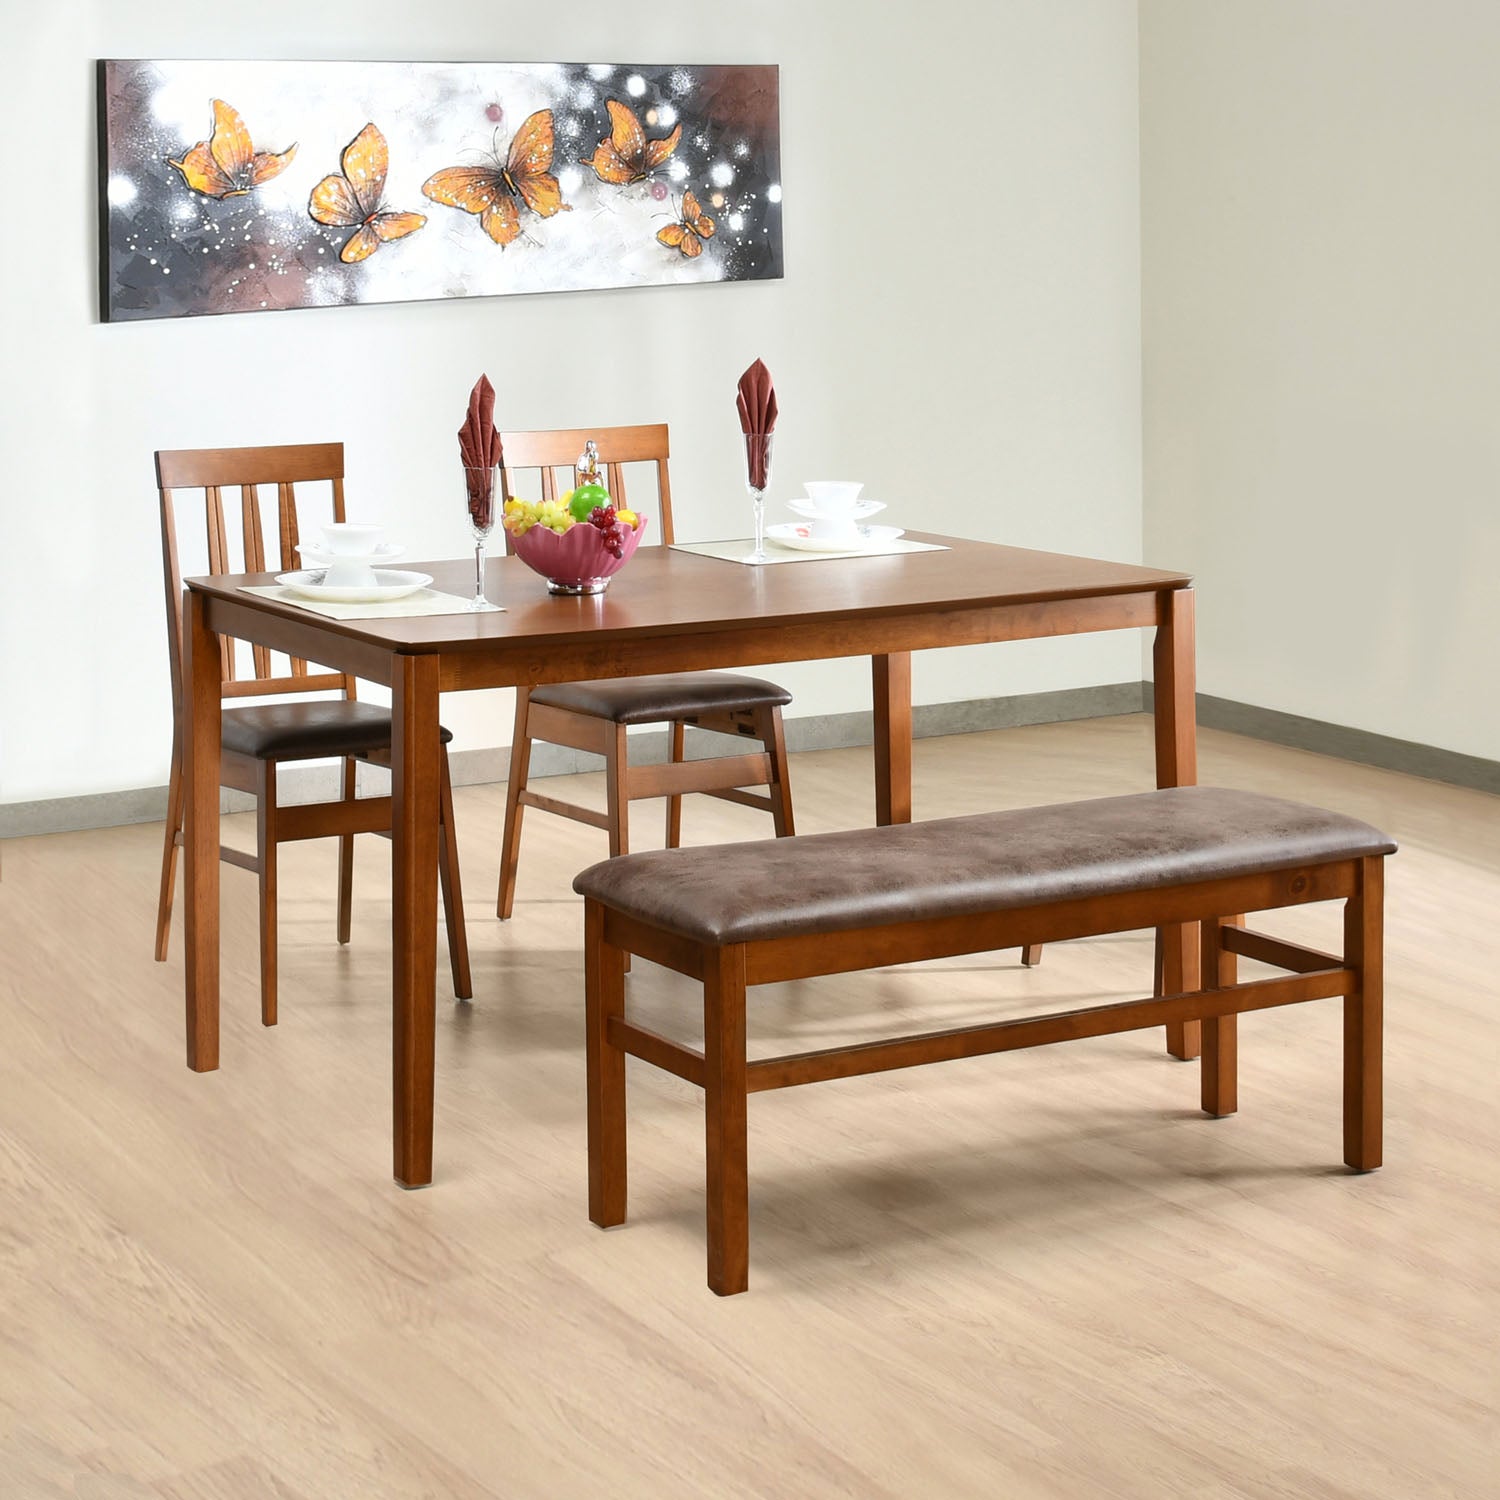 Leaf 4 Seater Dining Set With Bench (Walnut)